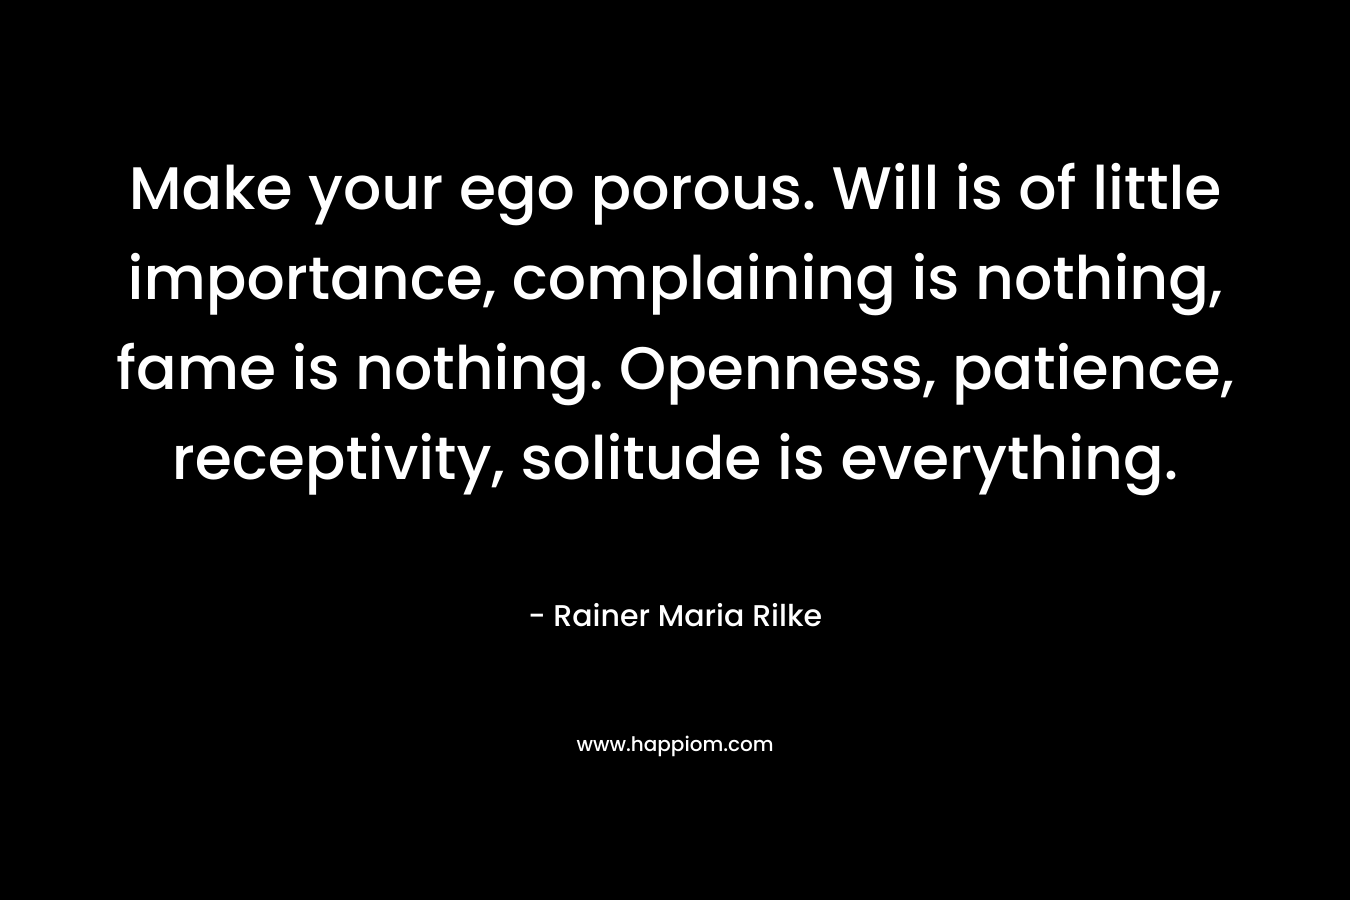 Make your ego porous. Will is of little importance, complaining is nothing, fame is nothing. Openness, patience, receptivity, solitude is everything. – Rainer Maria Rilke